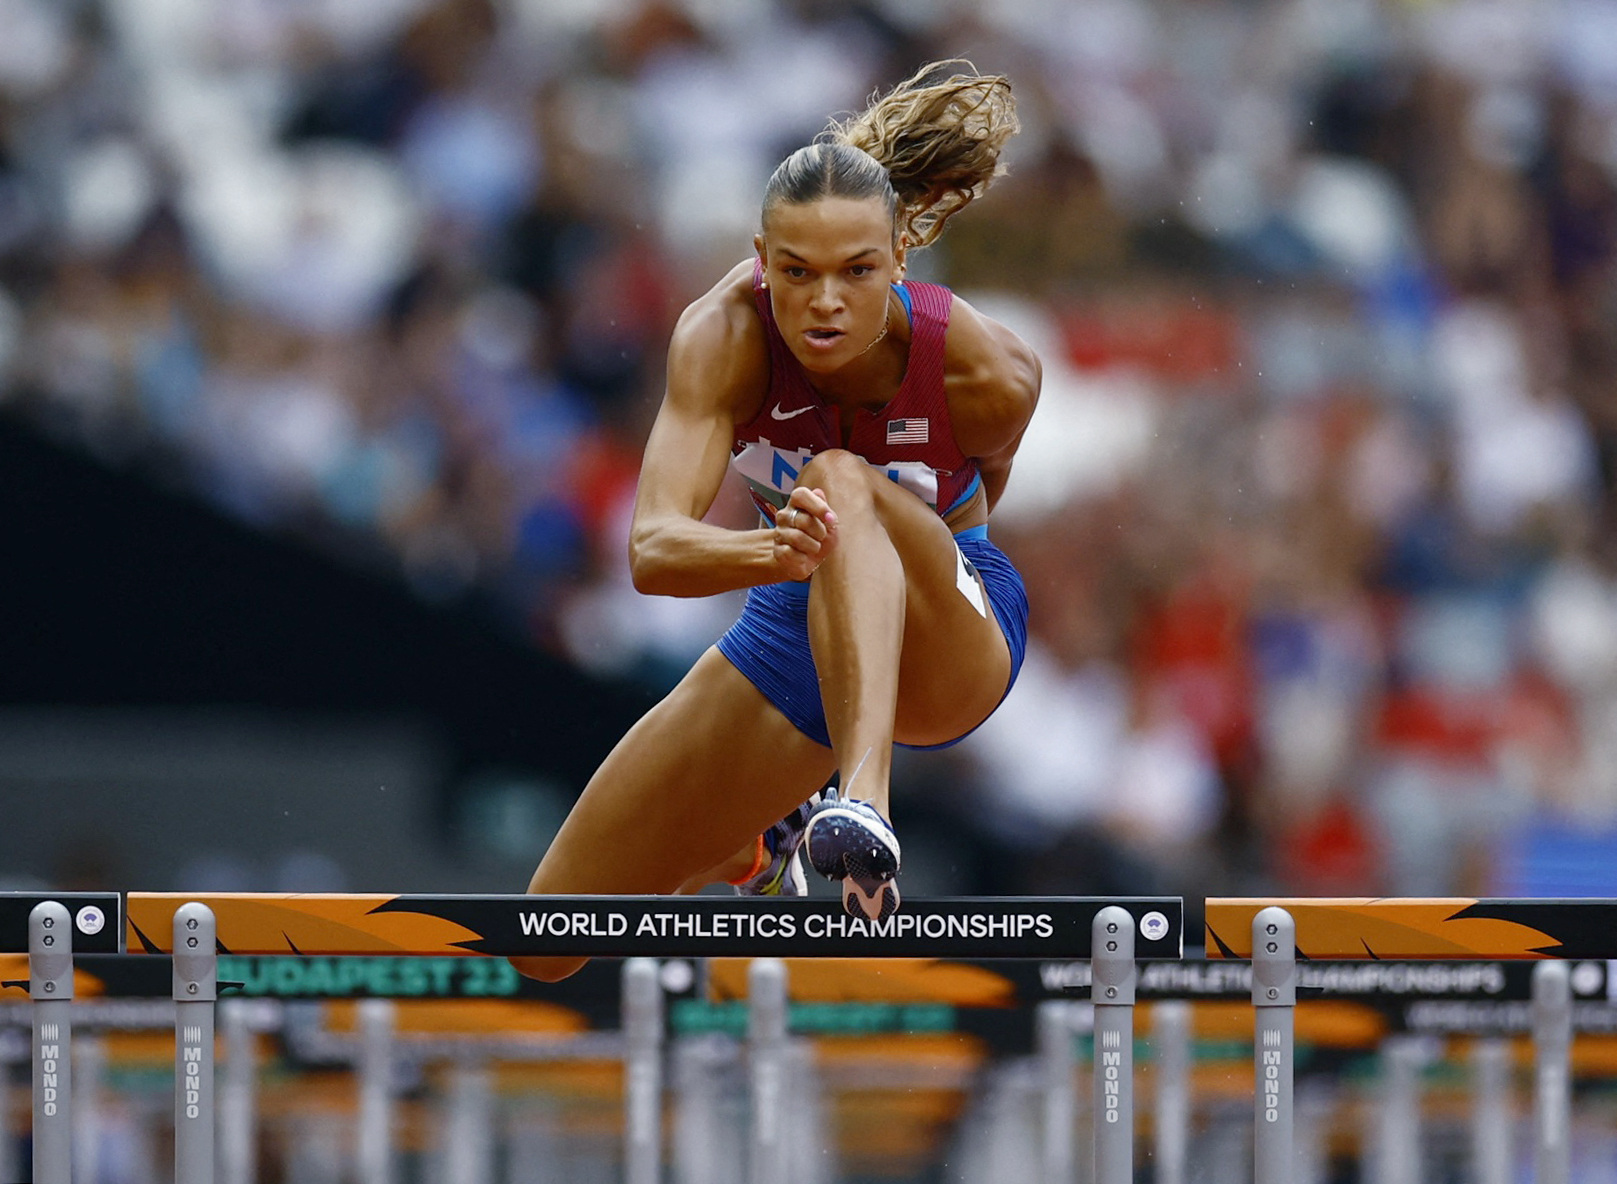 American Anna Hall leads after Day 1 of heptathlon at world